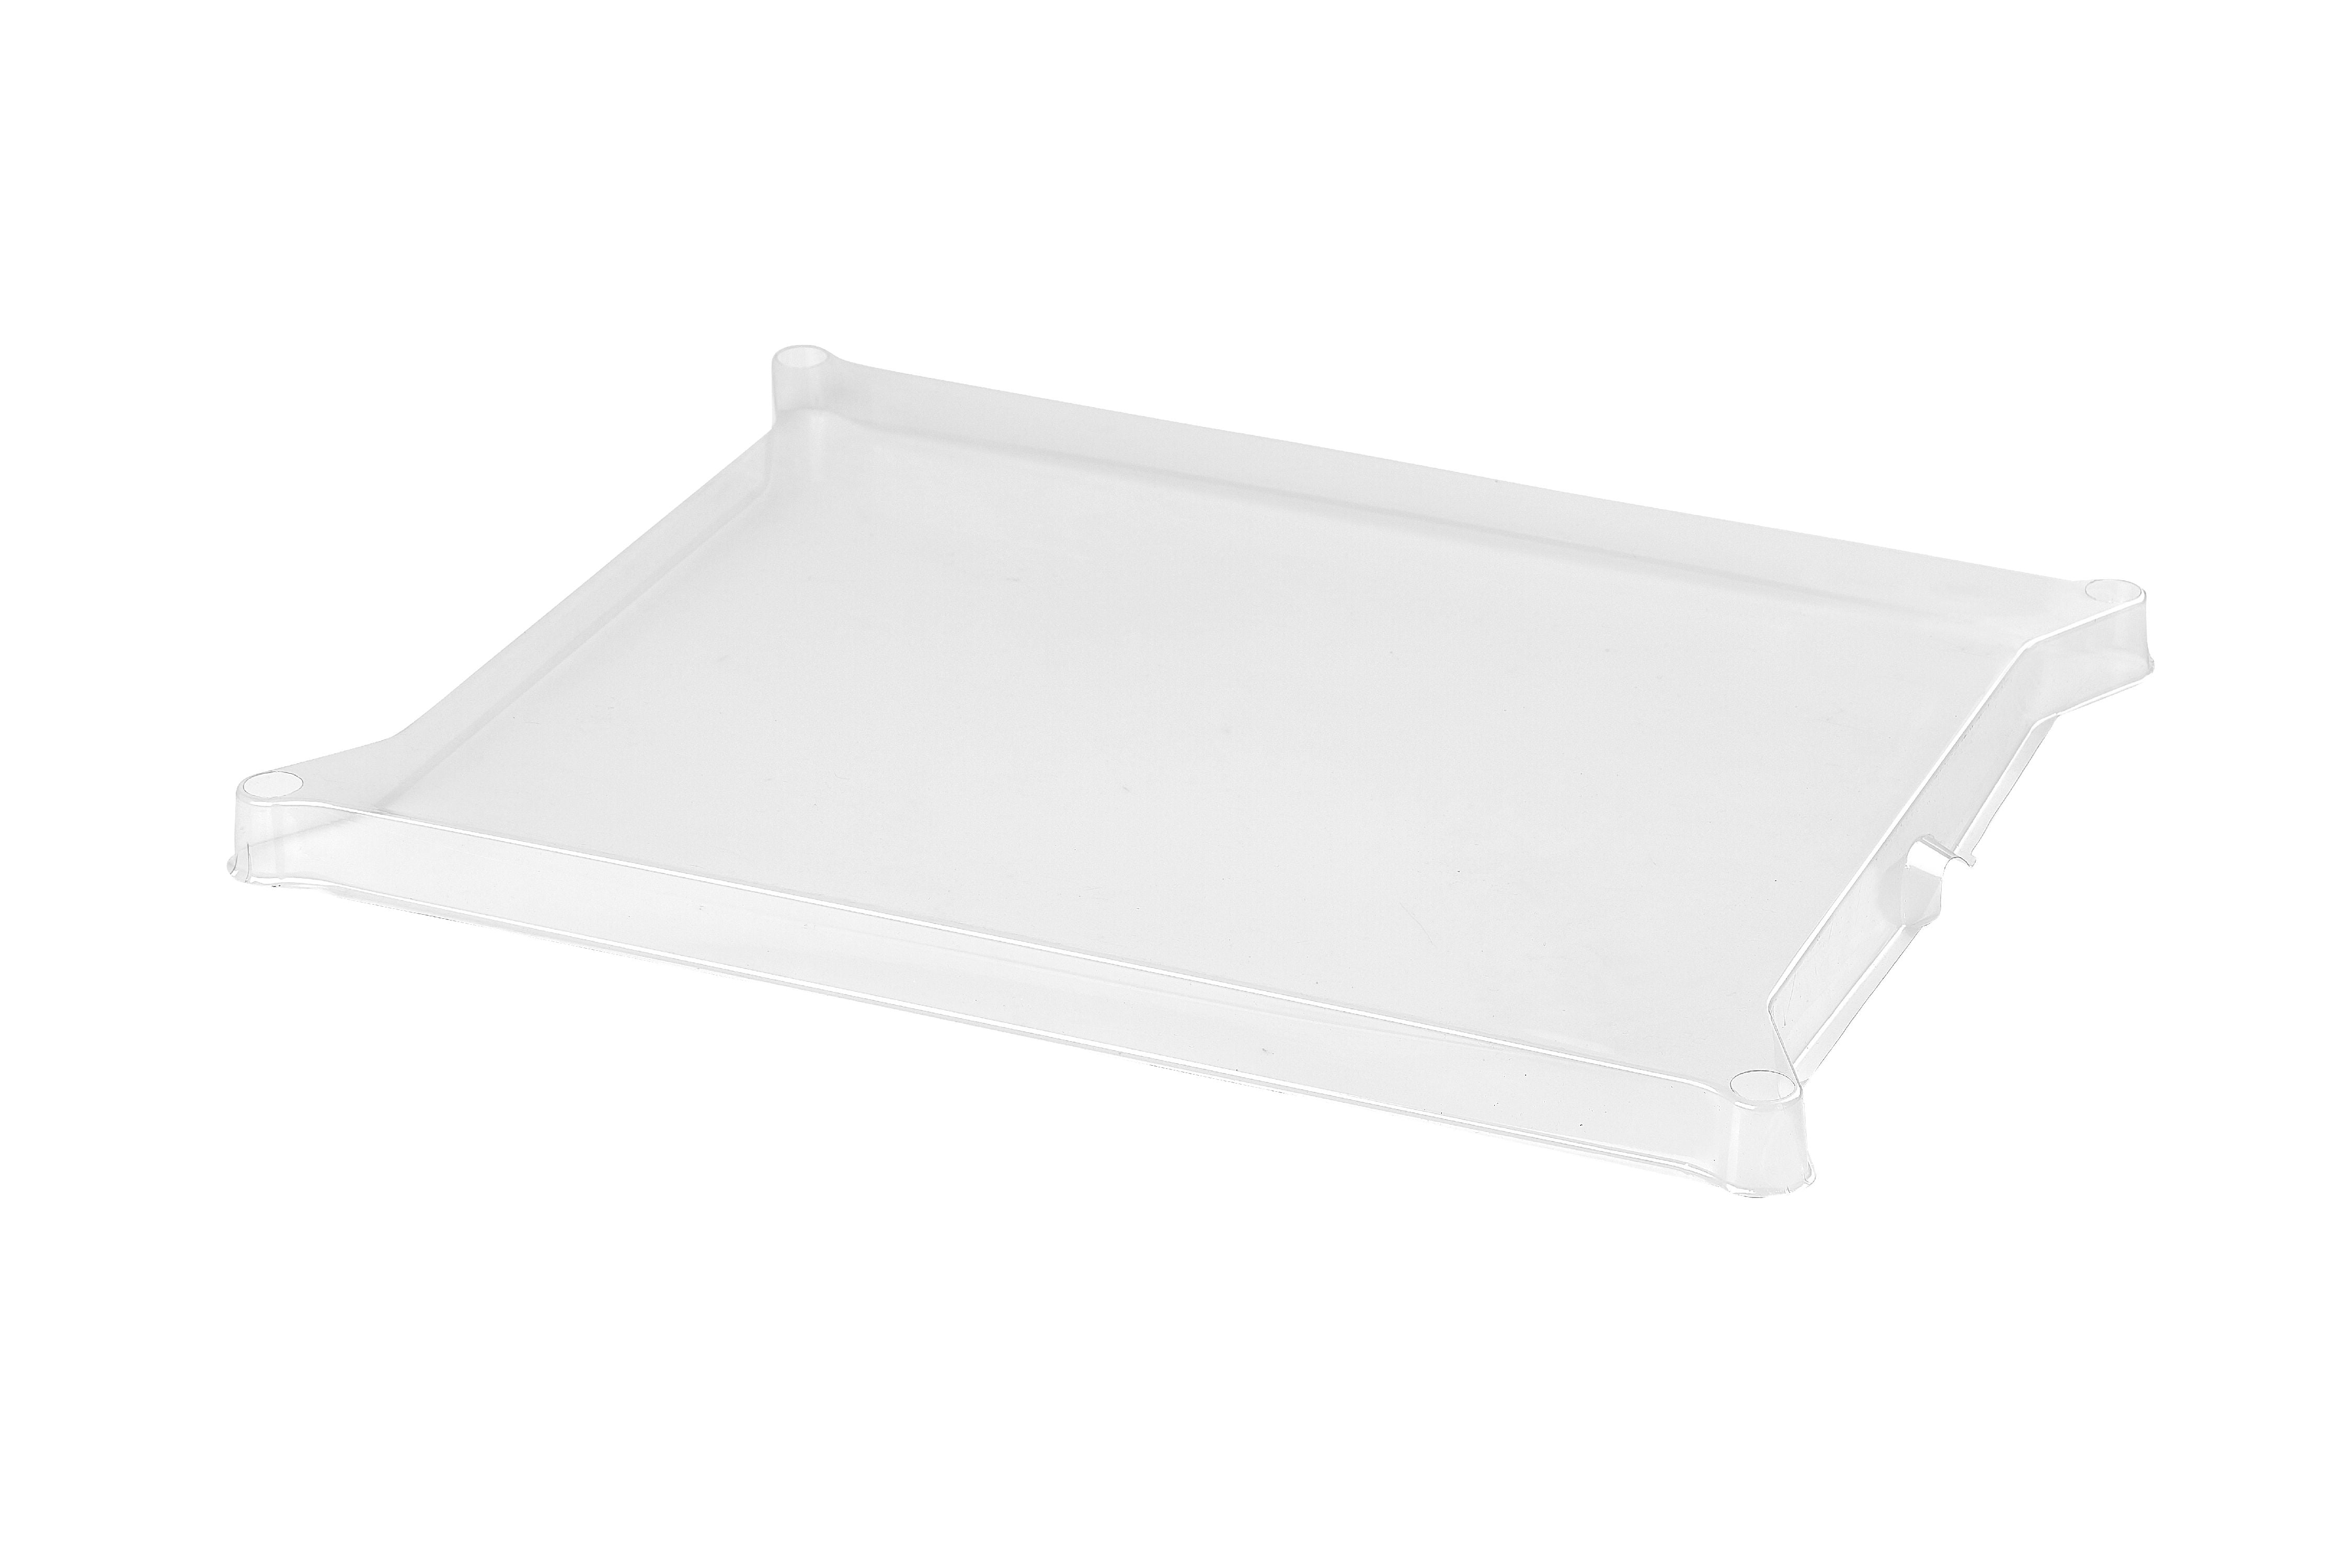 Brinsea Products Ushd052 Eco Glow 50 Chick Brooder Covers